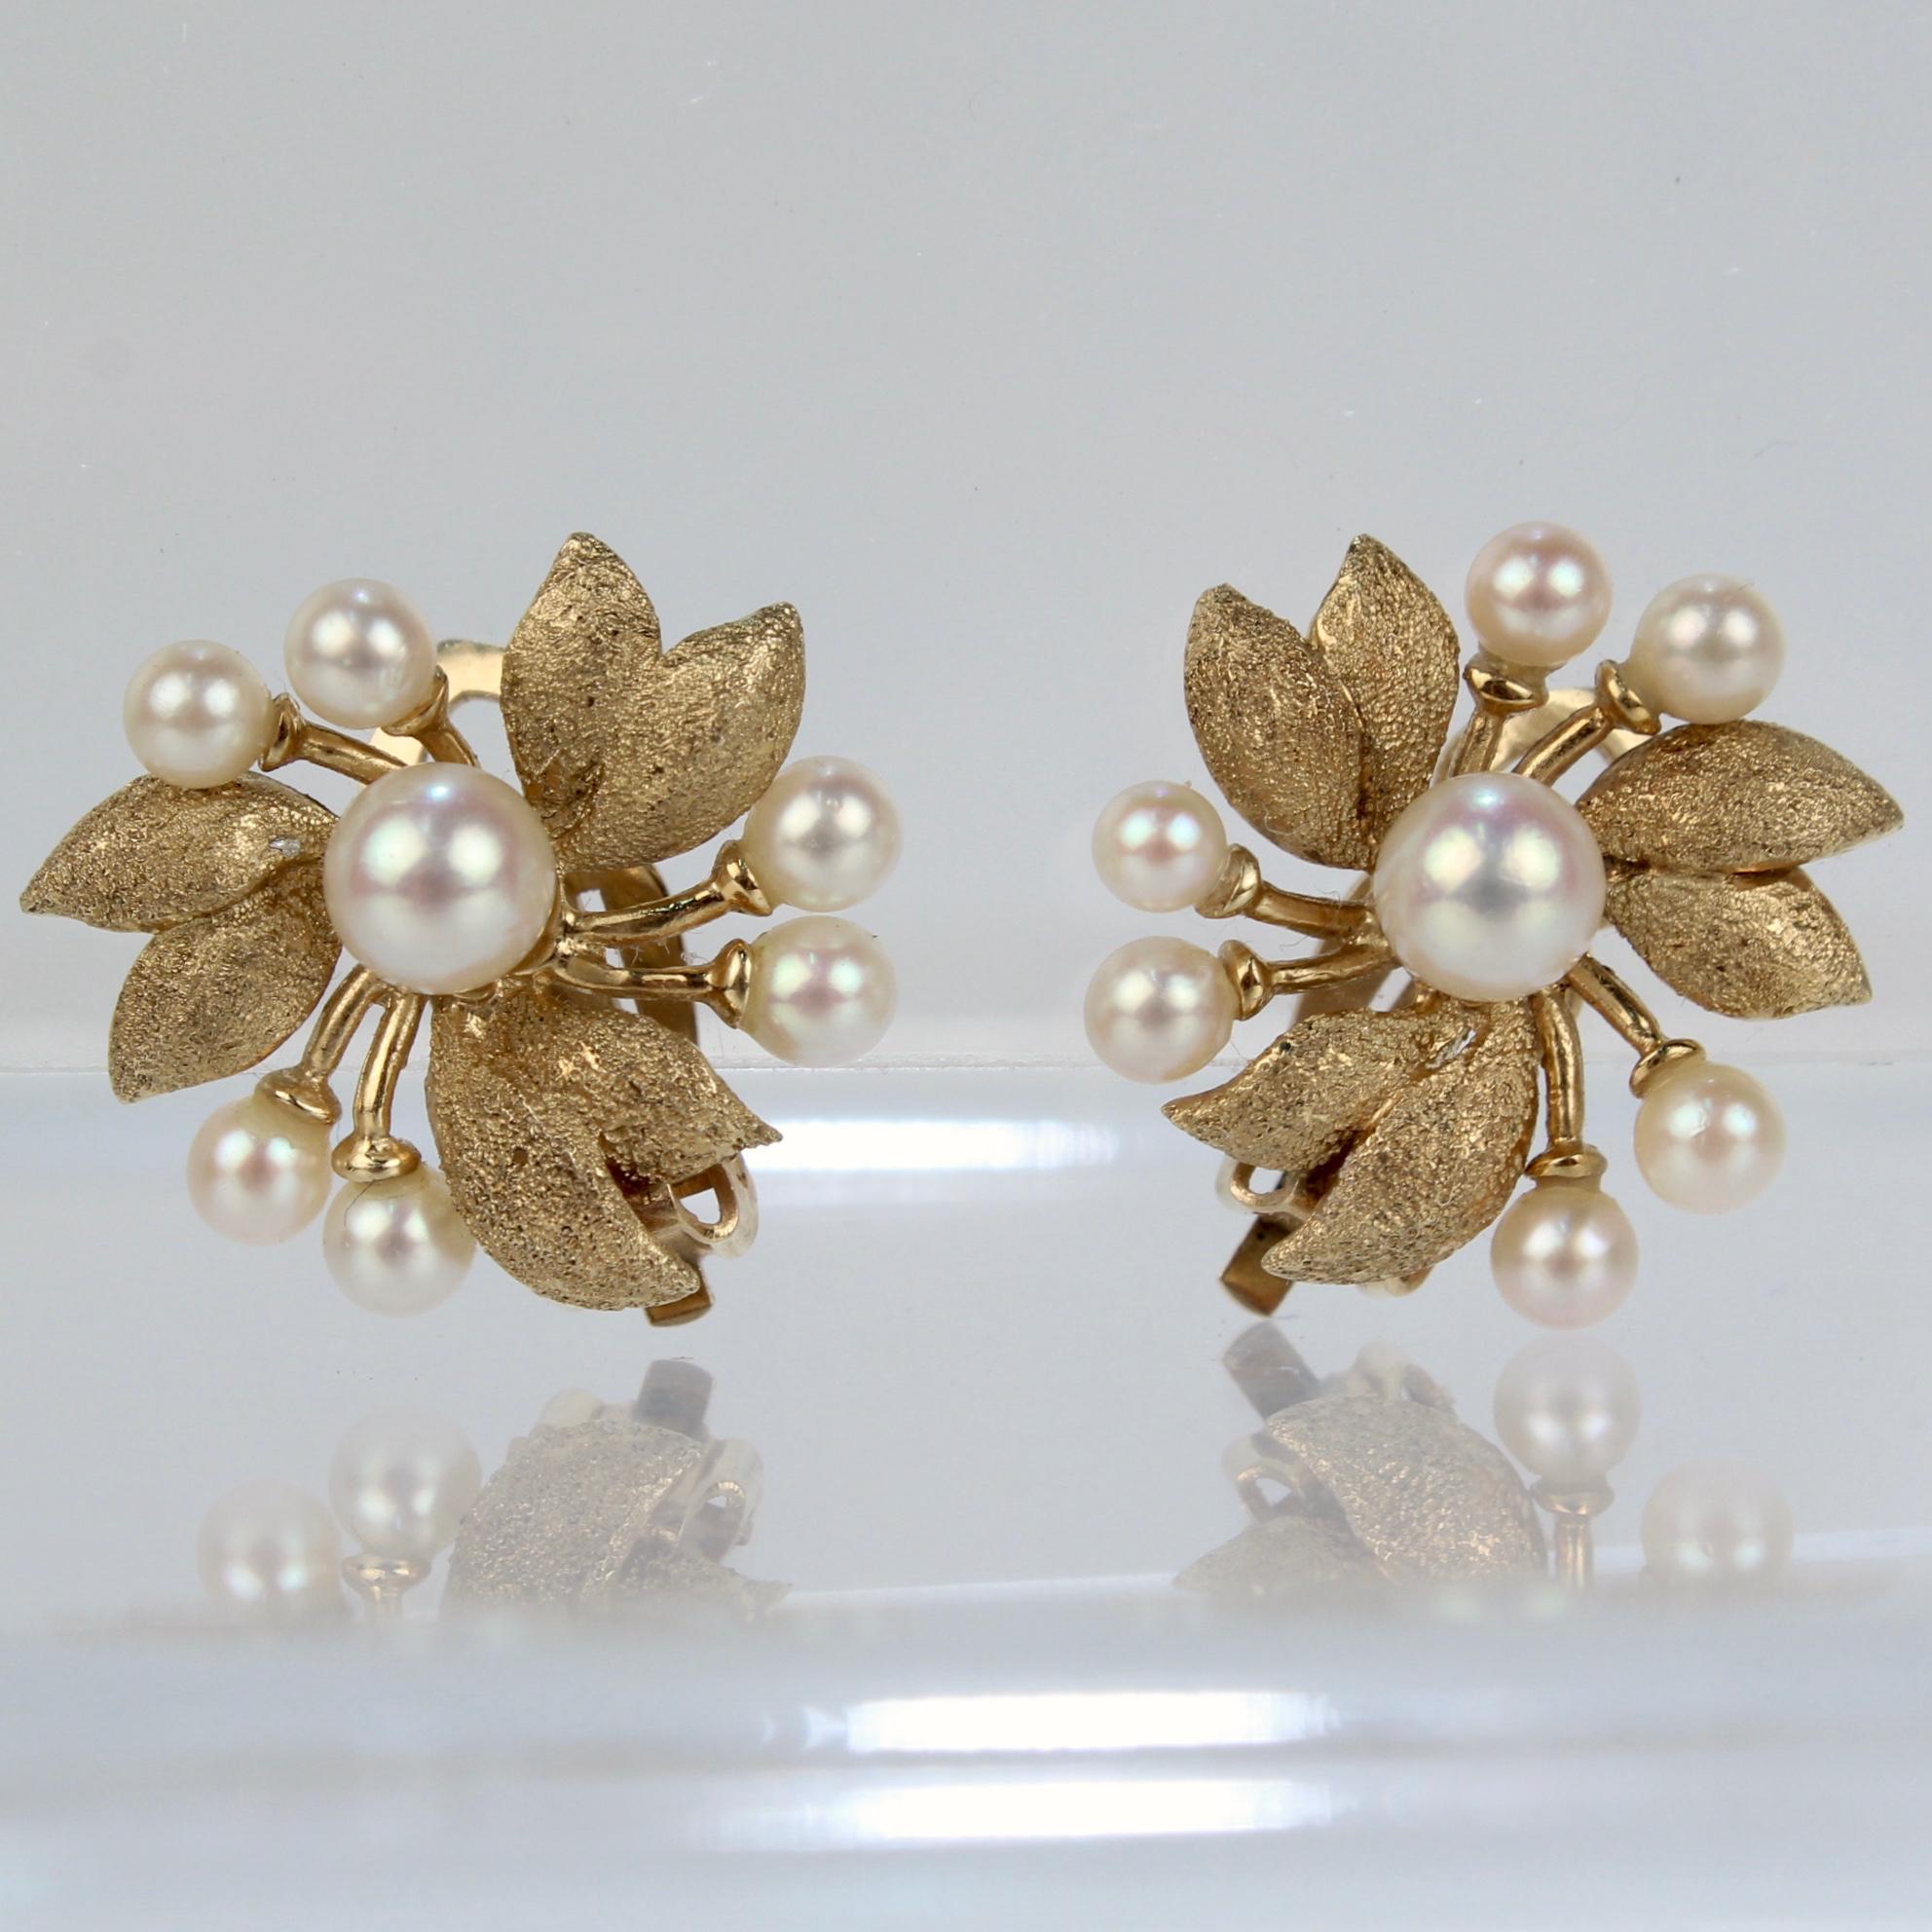 A fine pair of mid-century modern gold & pearl clip on earrings.

In the form of a stylized flower with textured 14k yellow gold petals and a pearl set center and stamens.

Simply wonderful Mid-century earrings!

Date:
Mid-20th Century

Overall